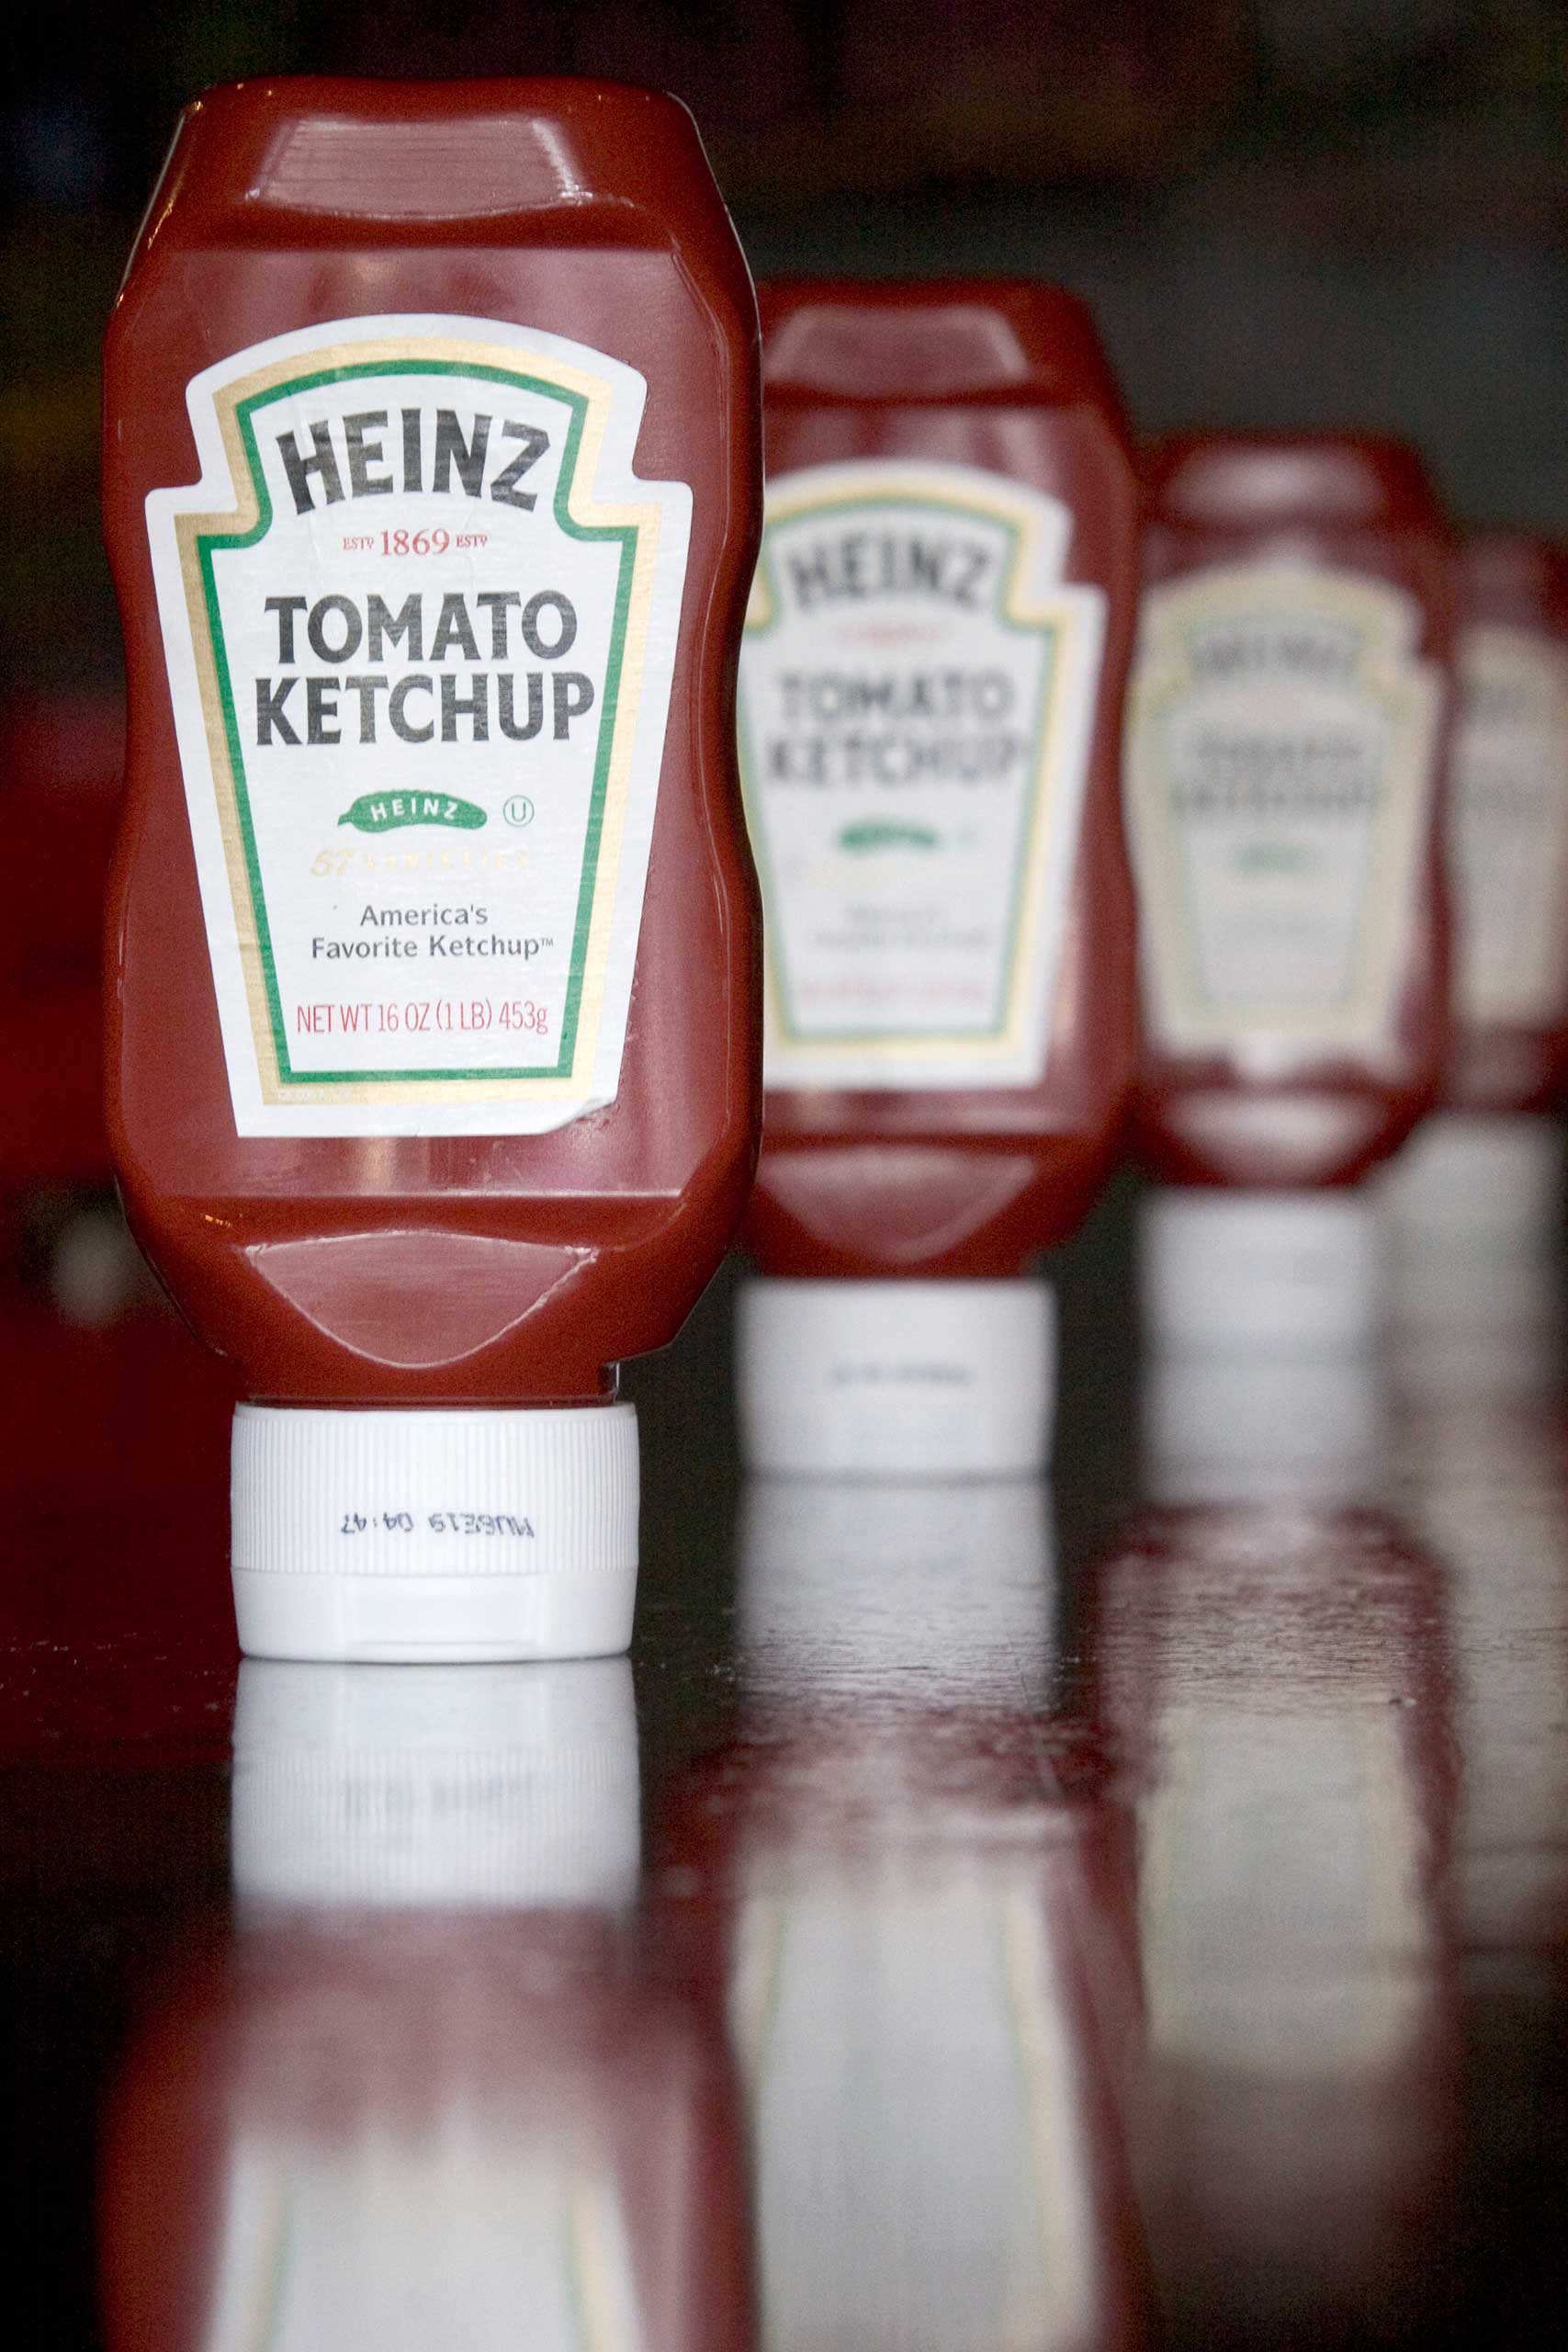 Bottles of Heinz ketchup are arranged on the bar at Cambridge Common restaurant in Cambridge, Massachusetts Wednesday, July 19, 2006. H.J. Heinz Co., fighting billionaire investor Nelson Peltz's attempt to restructure the company, forecast first-quarter earnings would exceed analysts' estimates, driven by sales in the U.S. and Canada. Photographer: JB Reed/Bloomberg News